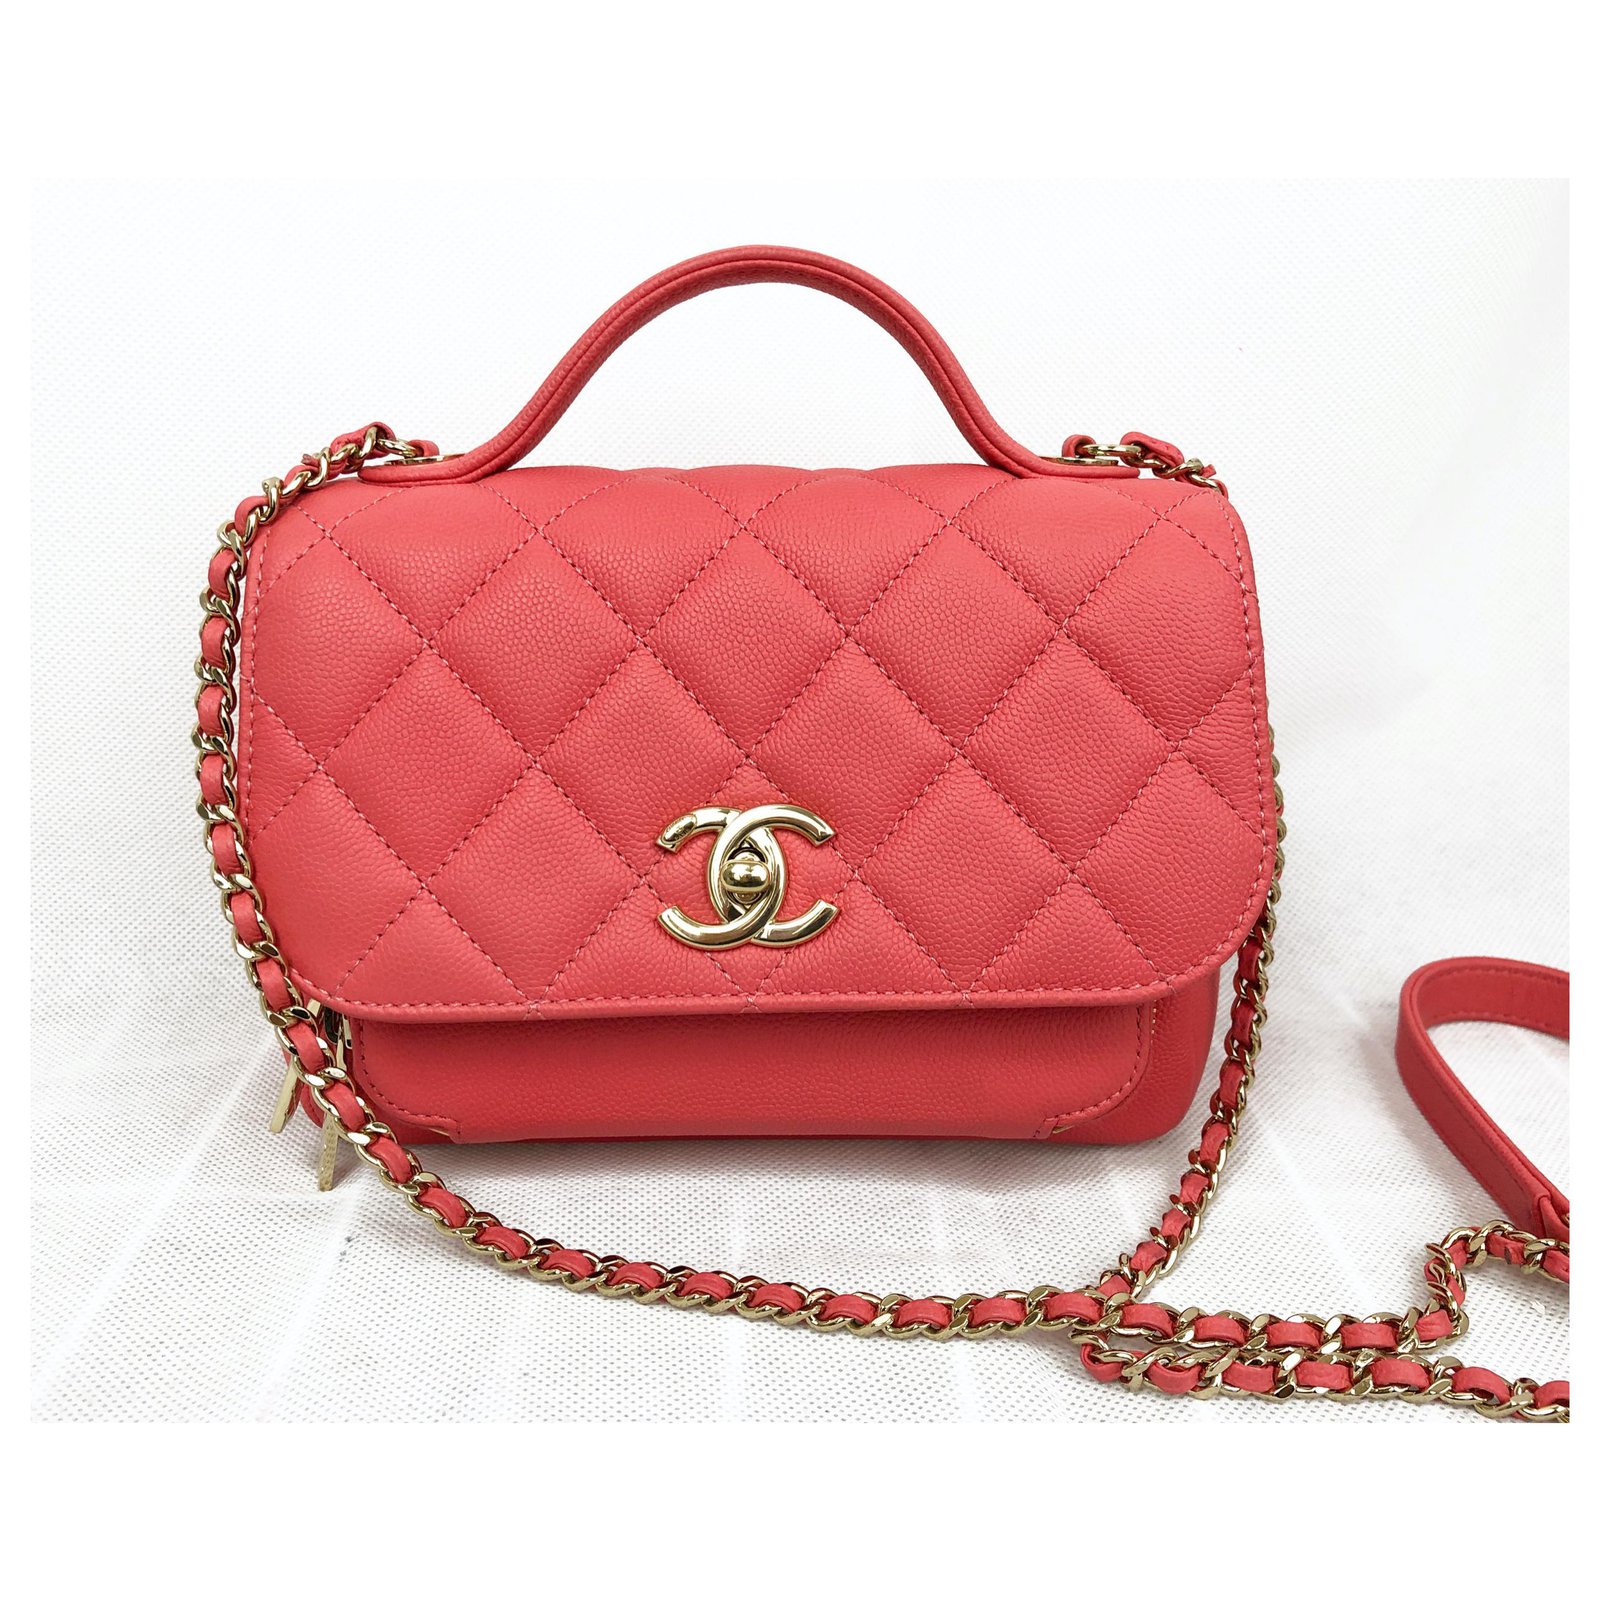 Coco Handle Chanel Business Affinity Rose coral bag Pink Leather